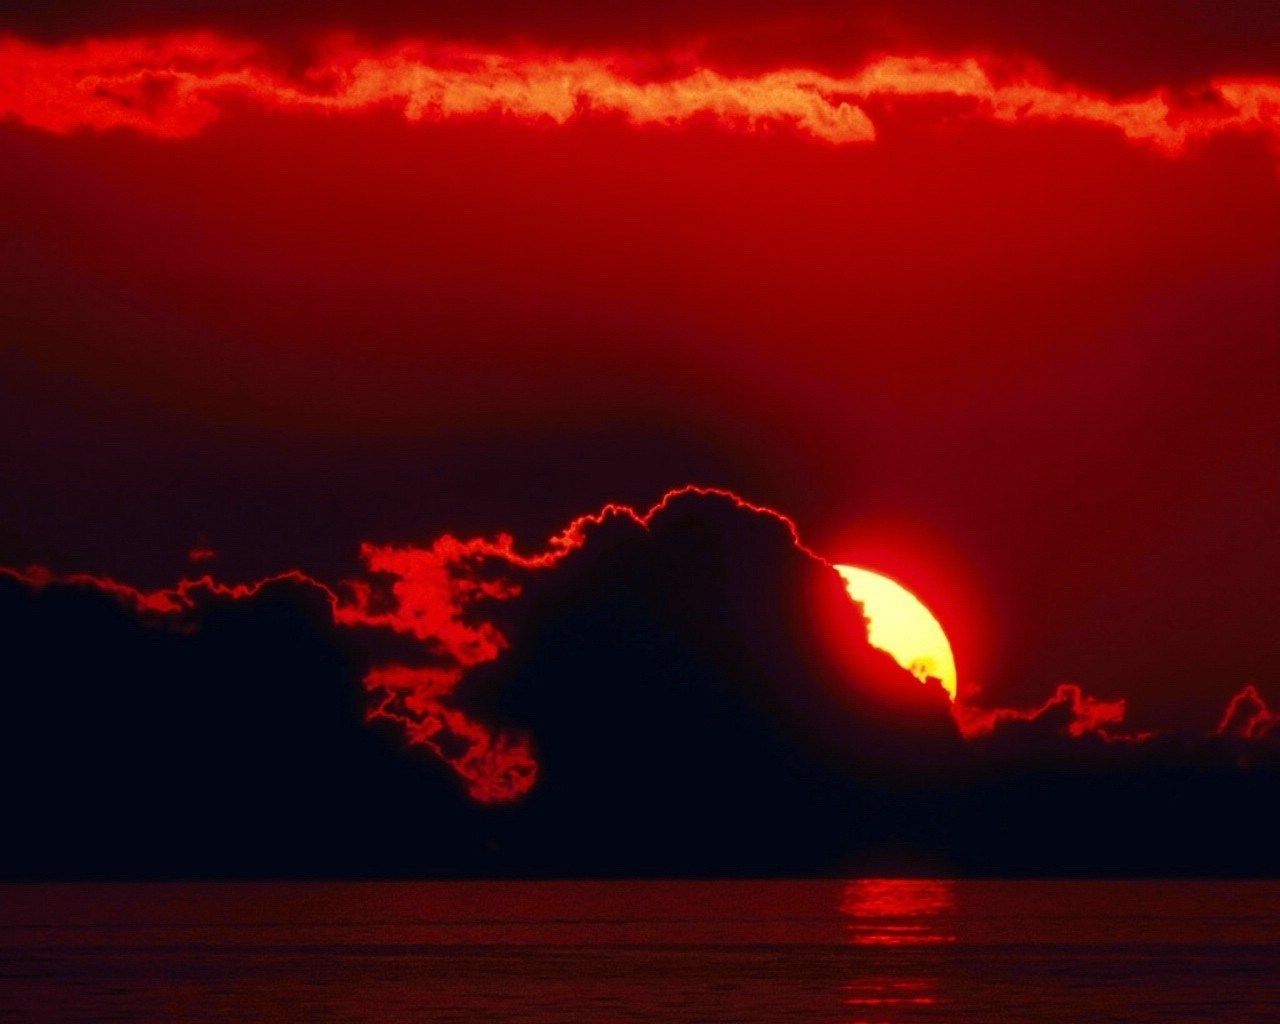 A red sun setting behind clouds and water - Crimson